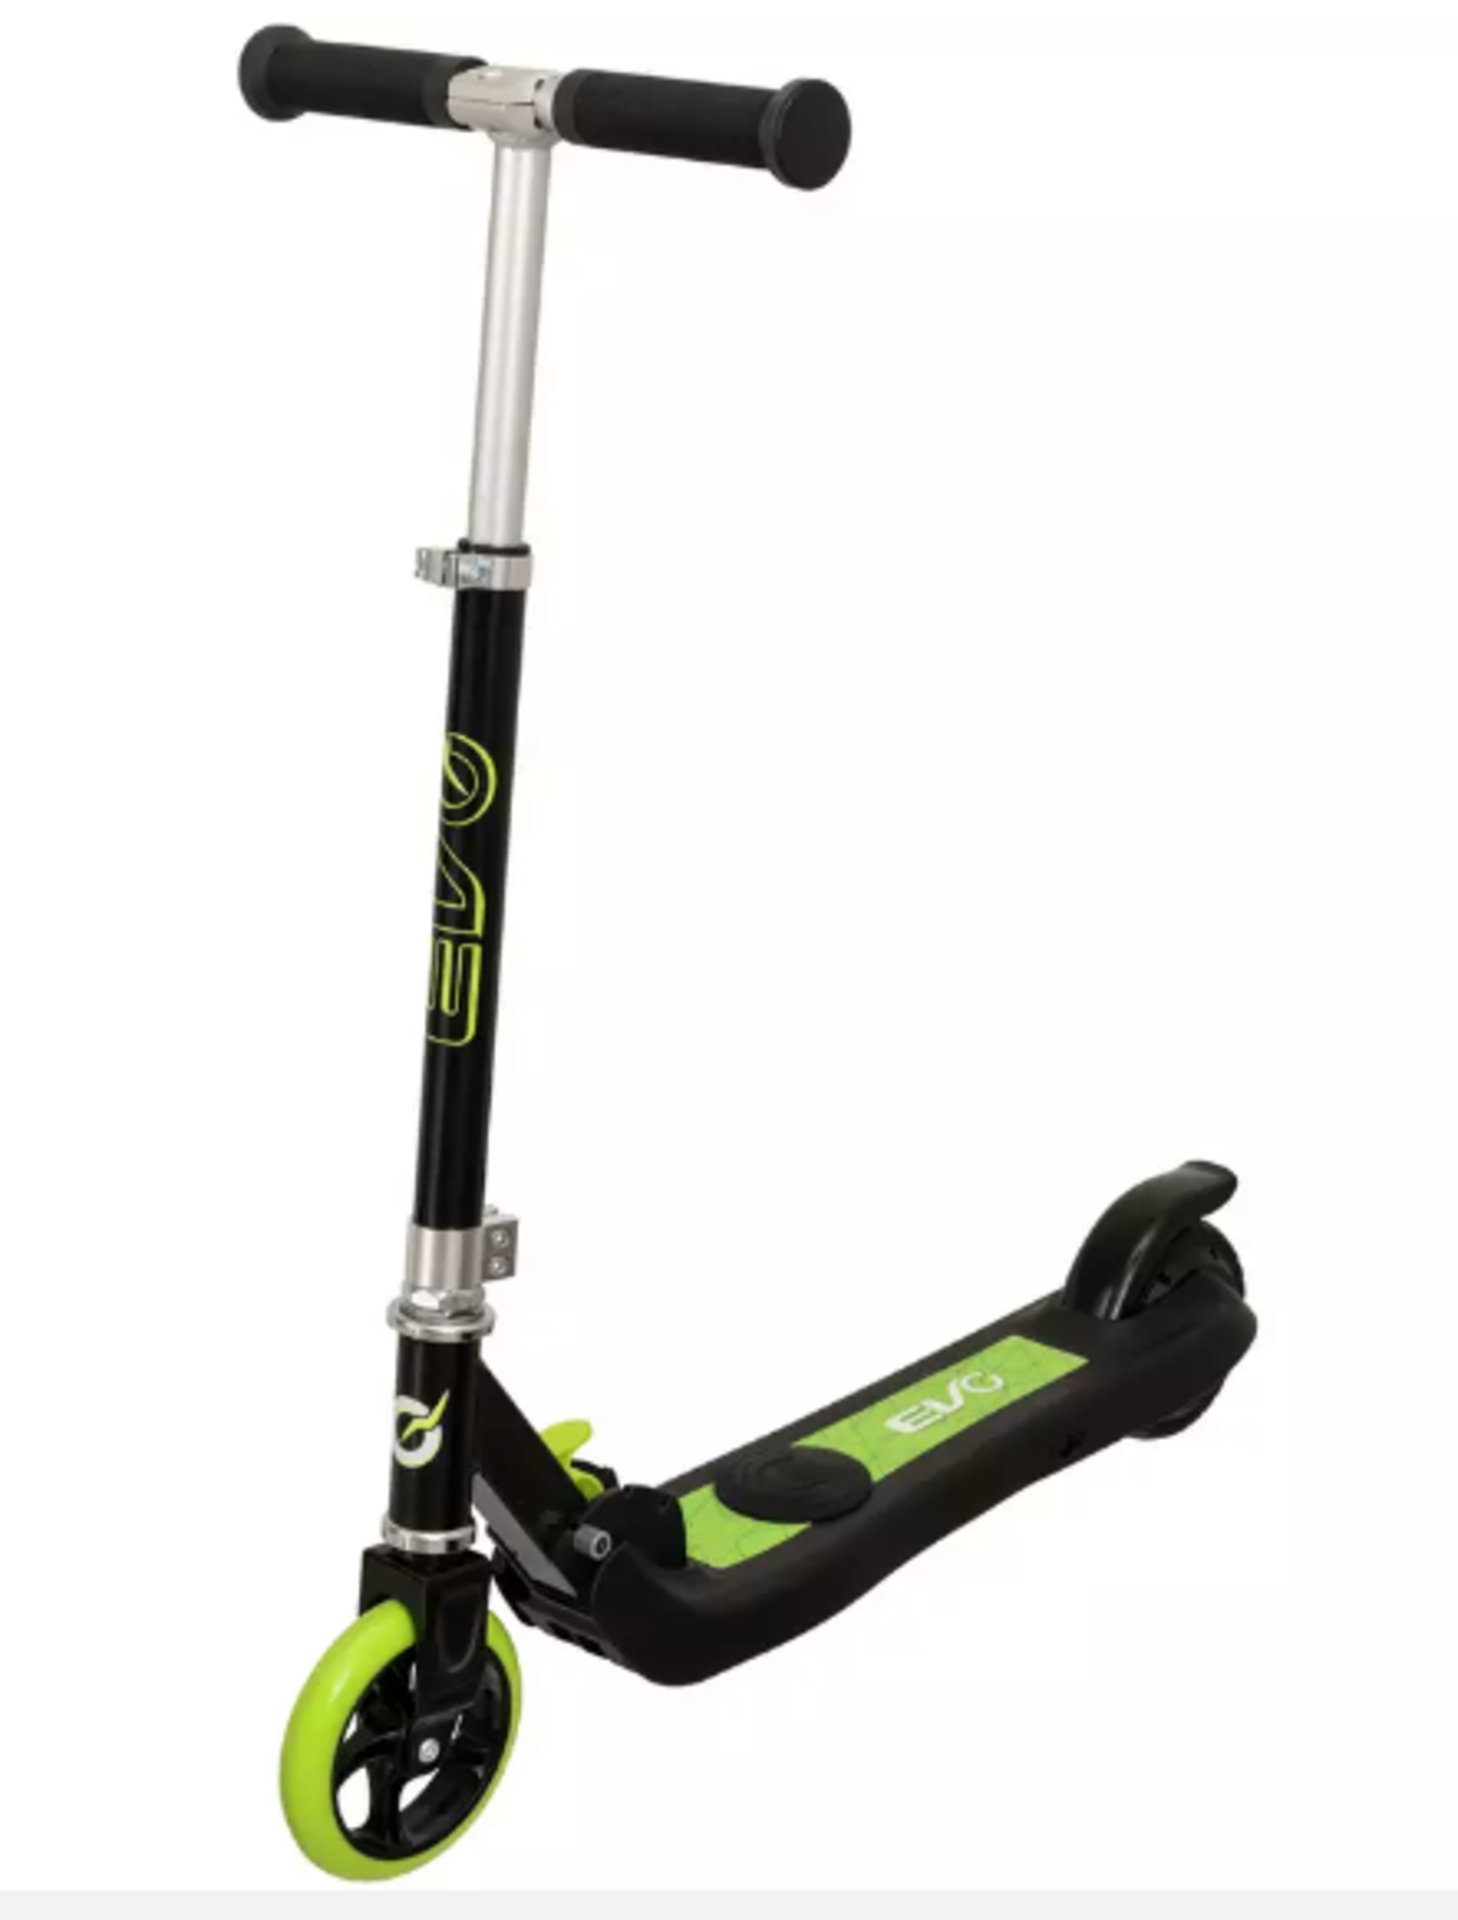 EVO VT1 Folding Electric Scooter. RRP £125.00. The EVO VT1 Electric Scooter is the ideal model for a